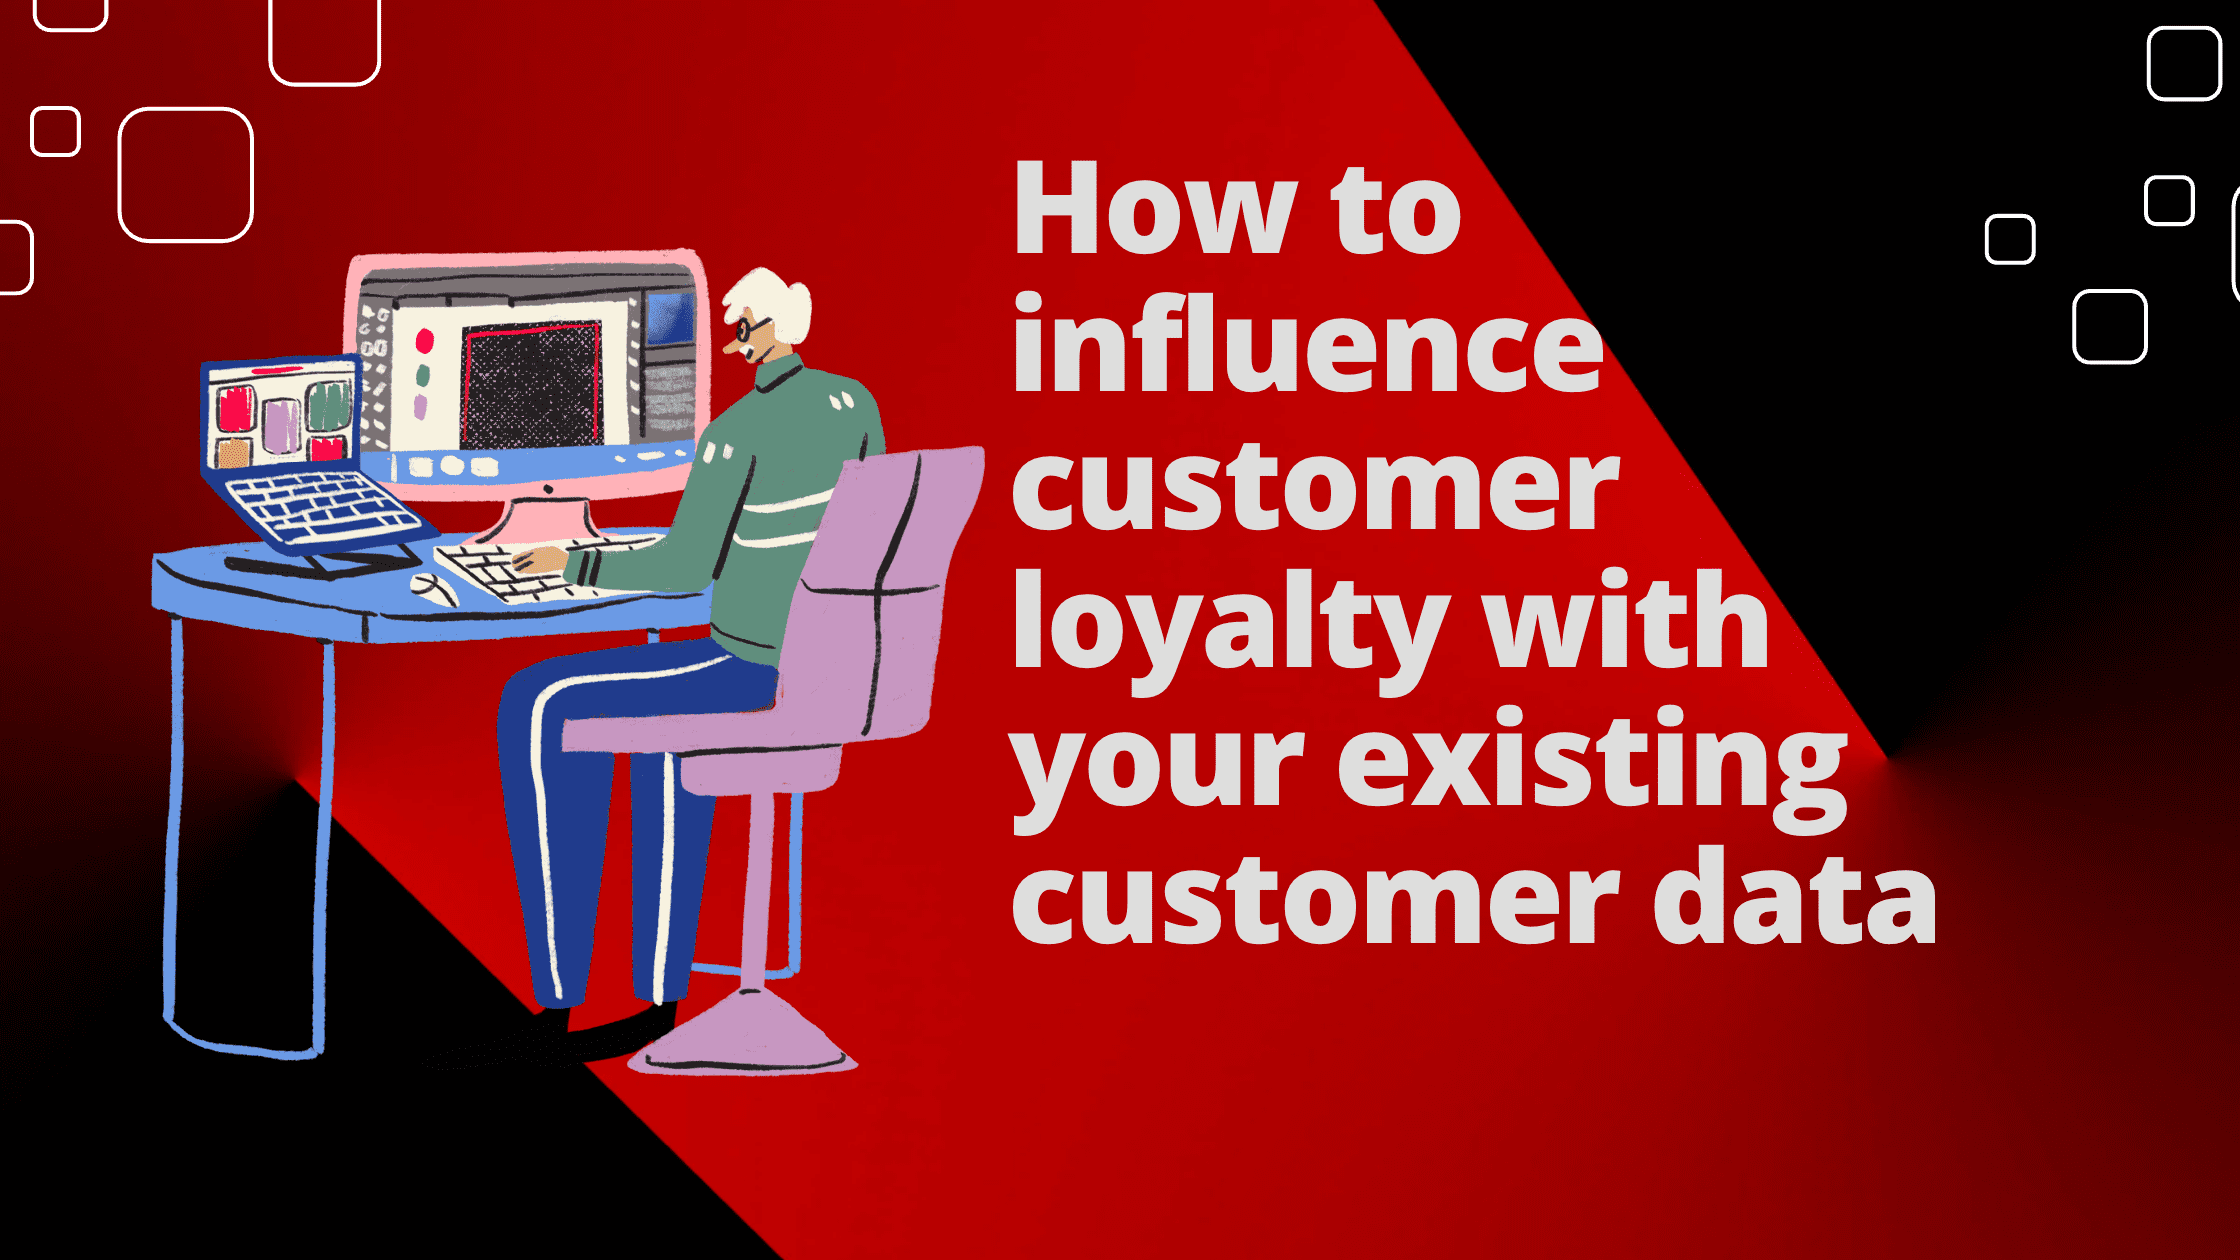 How to influence customer loyalty with your existing customer data